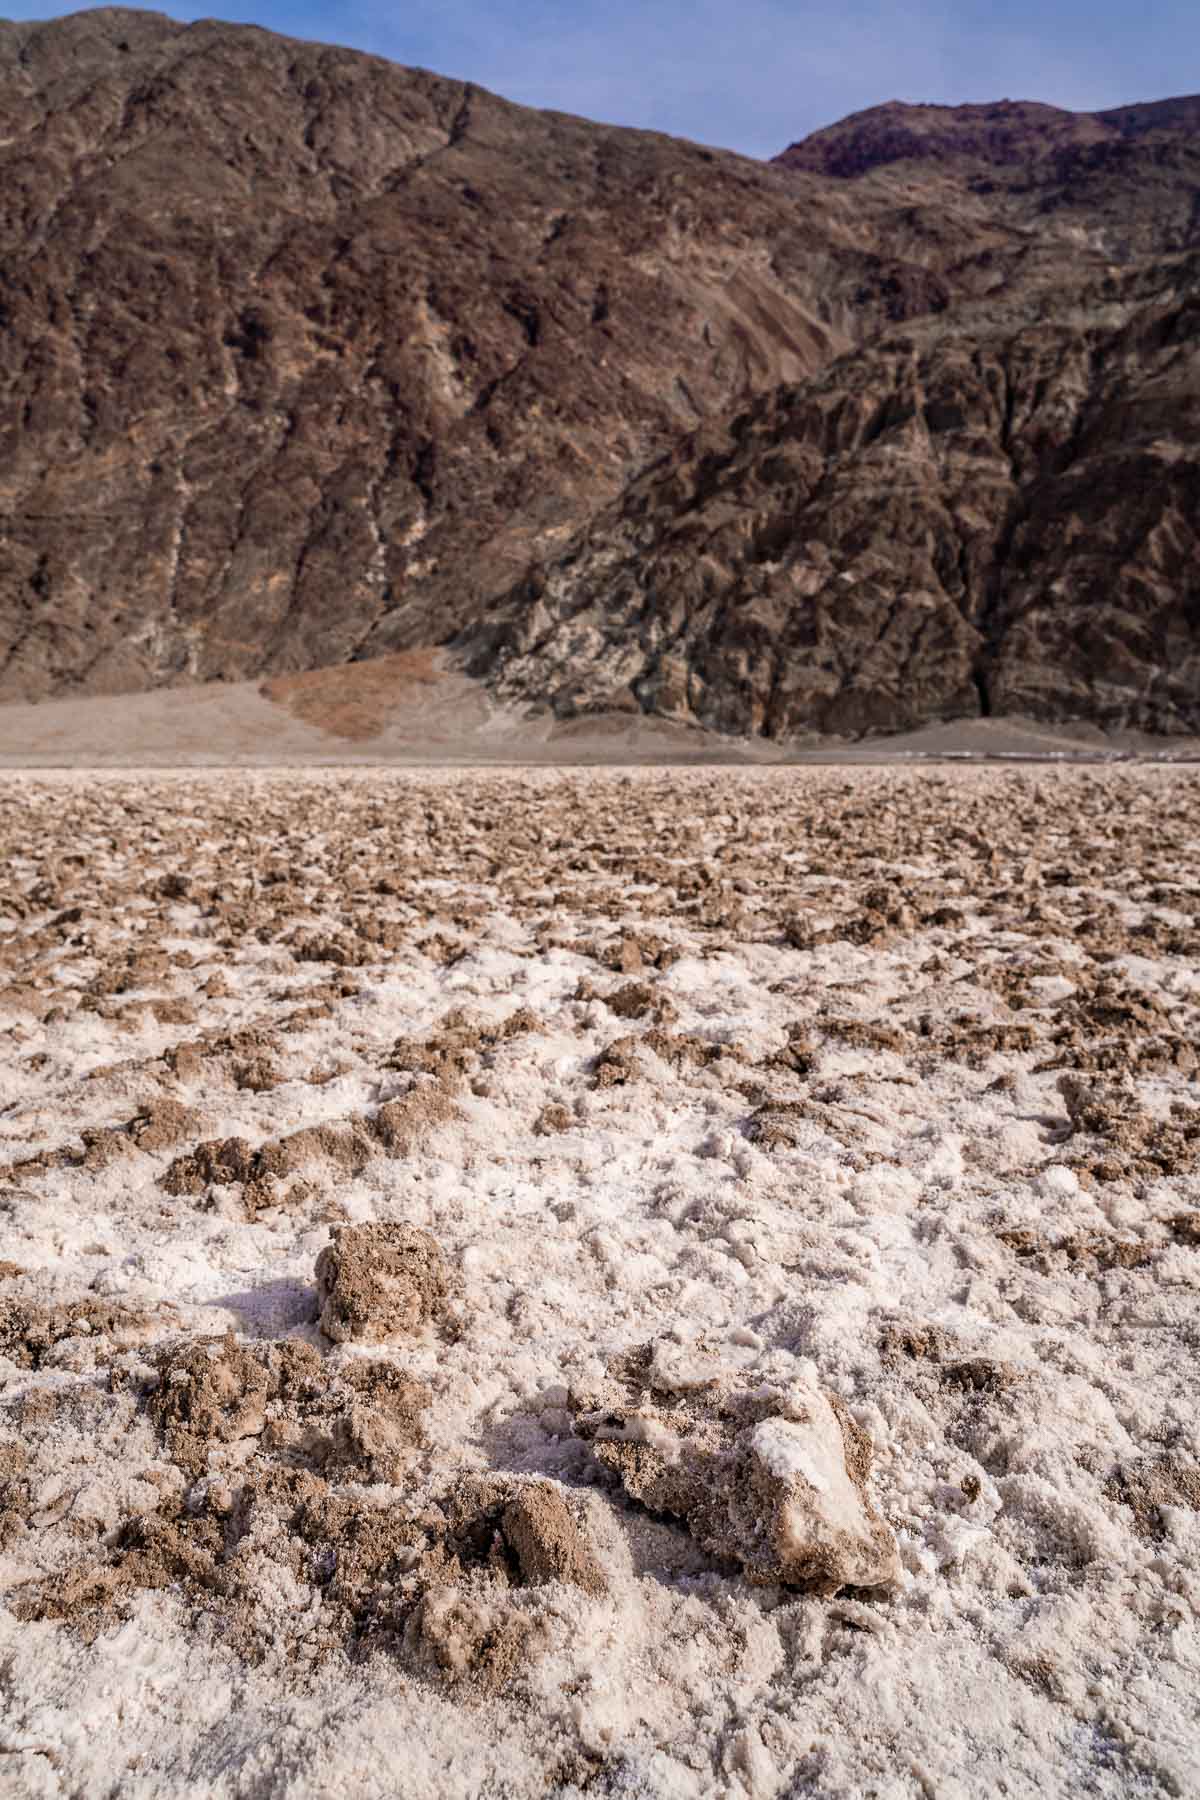 Salt flats at Badwater Basin in Death Valley National Park